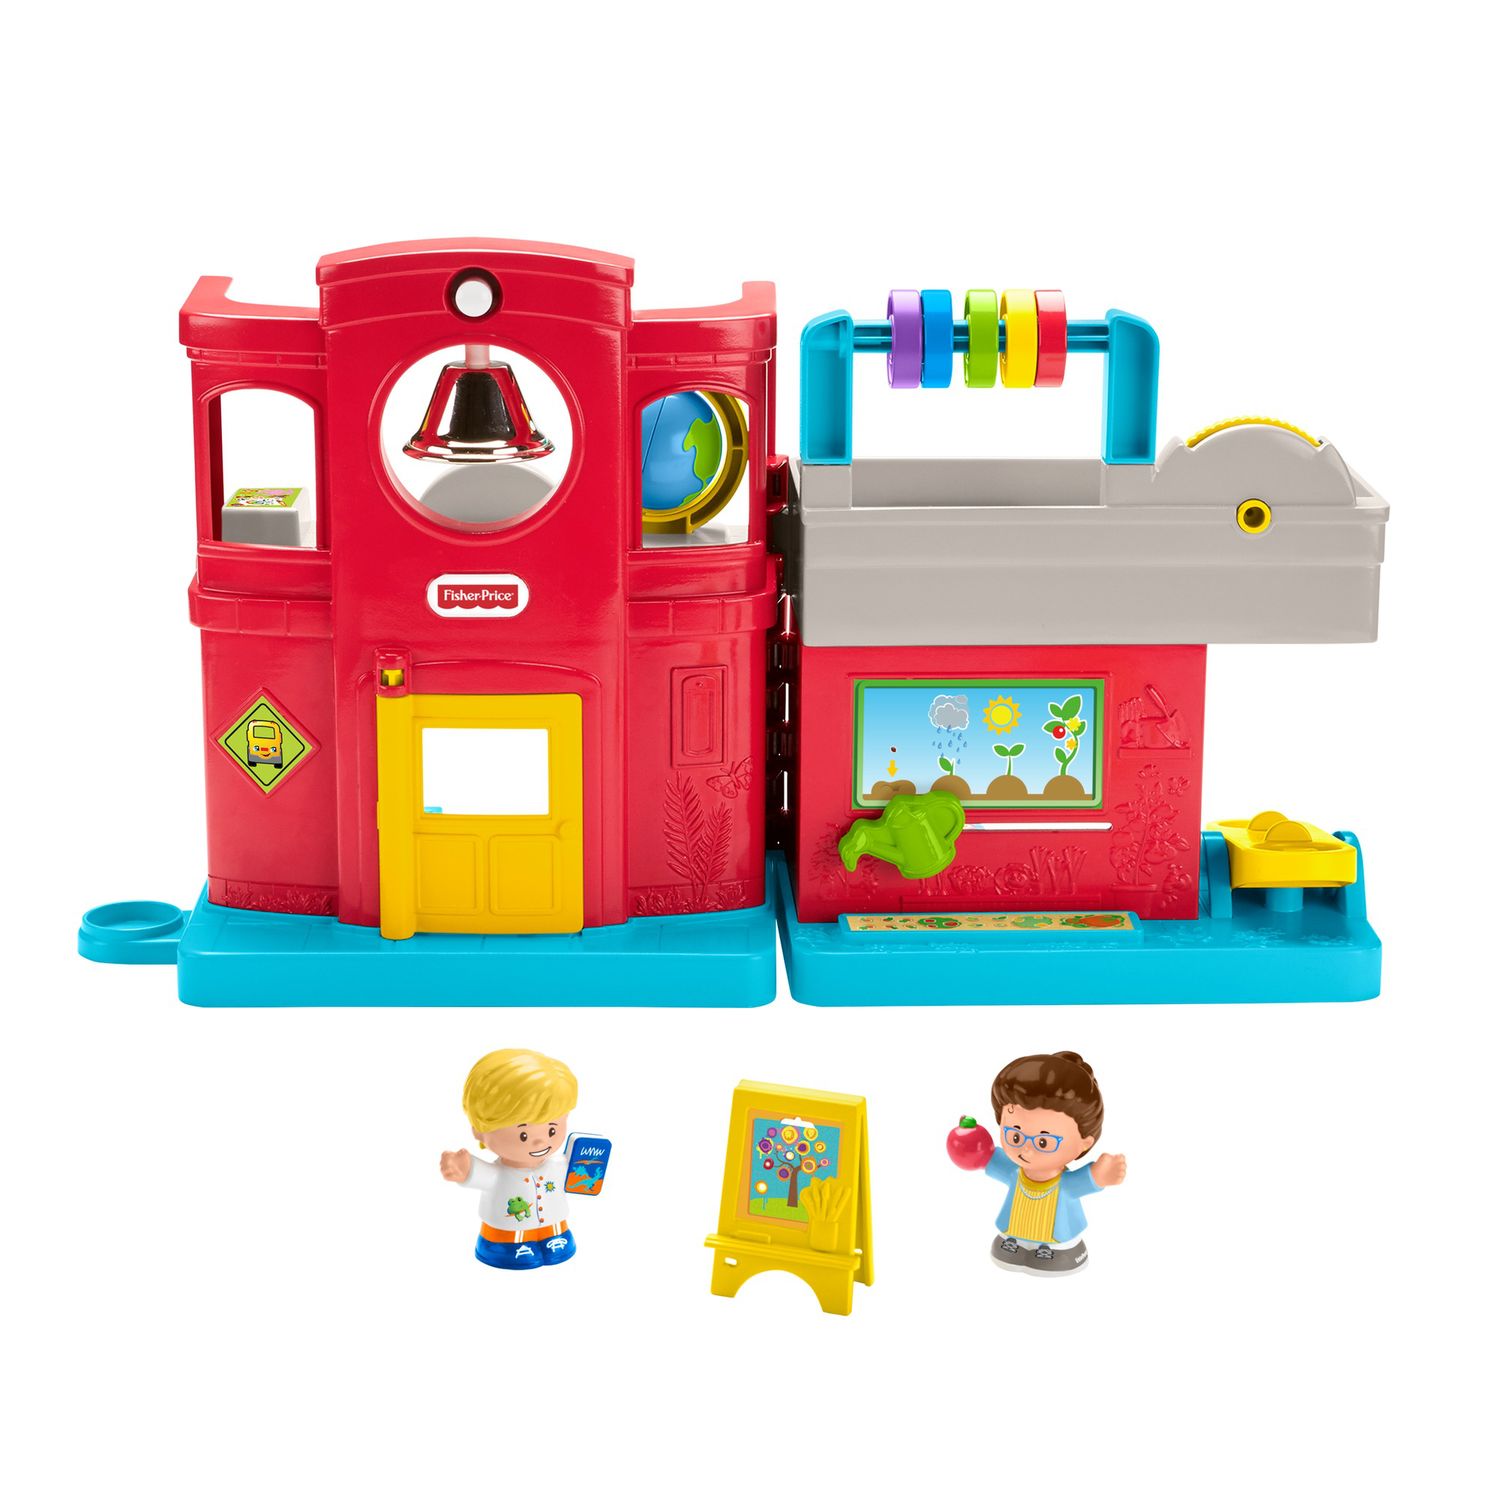 little people toy sets